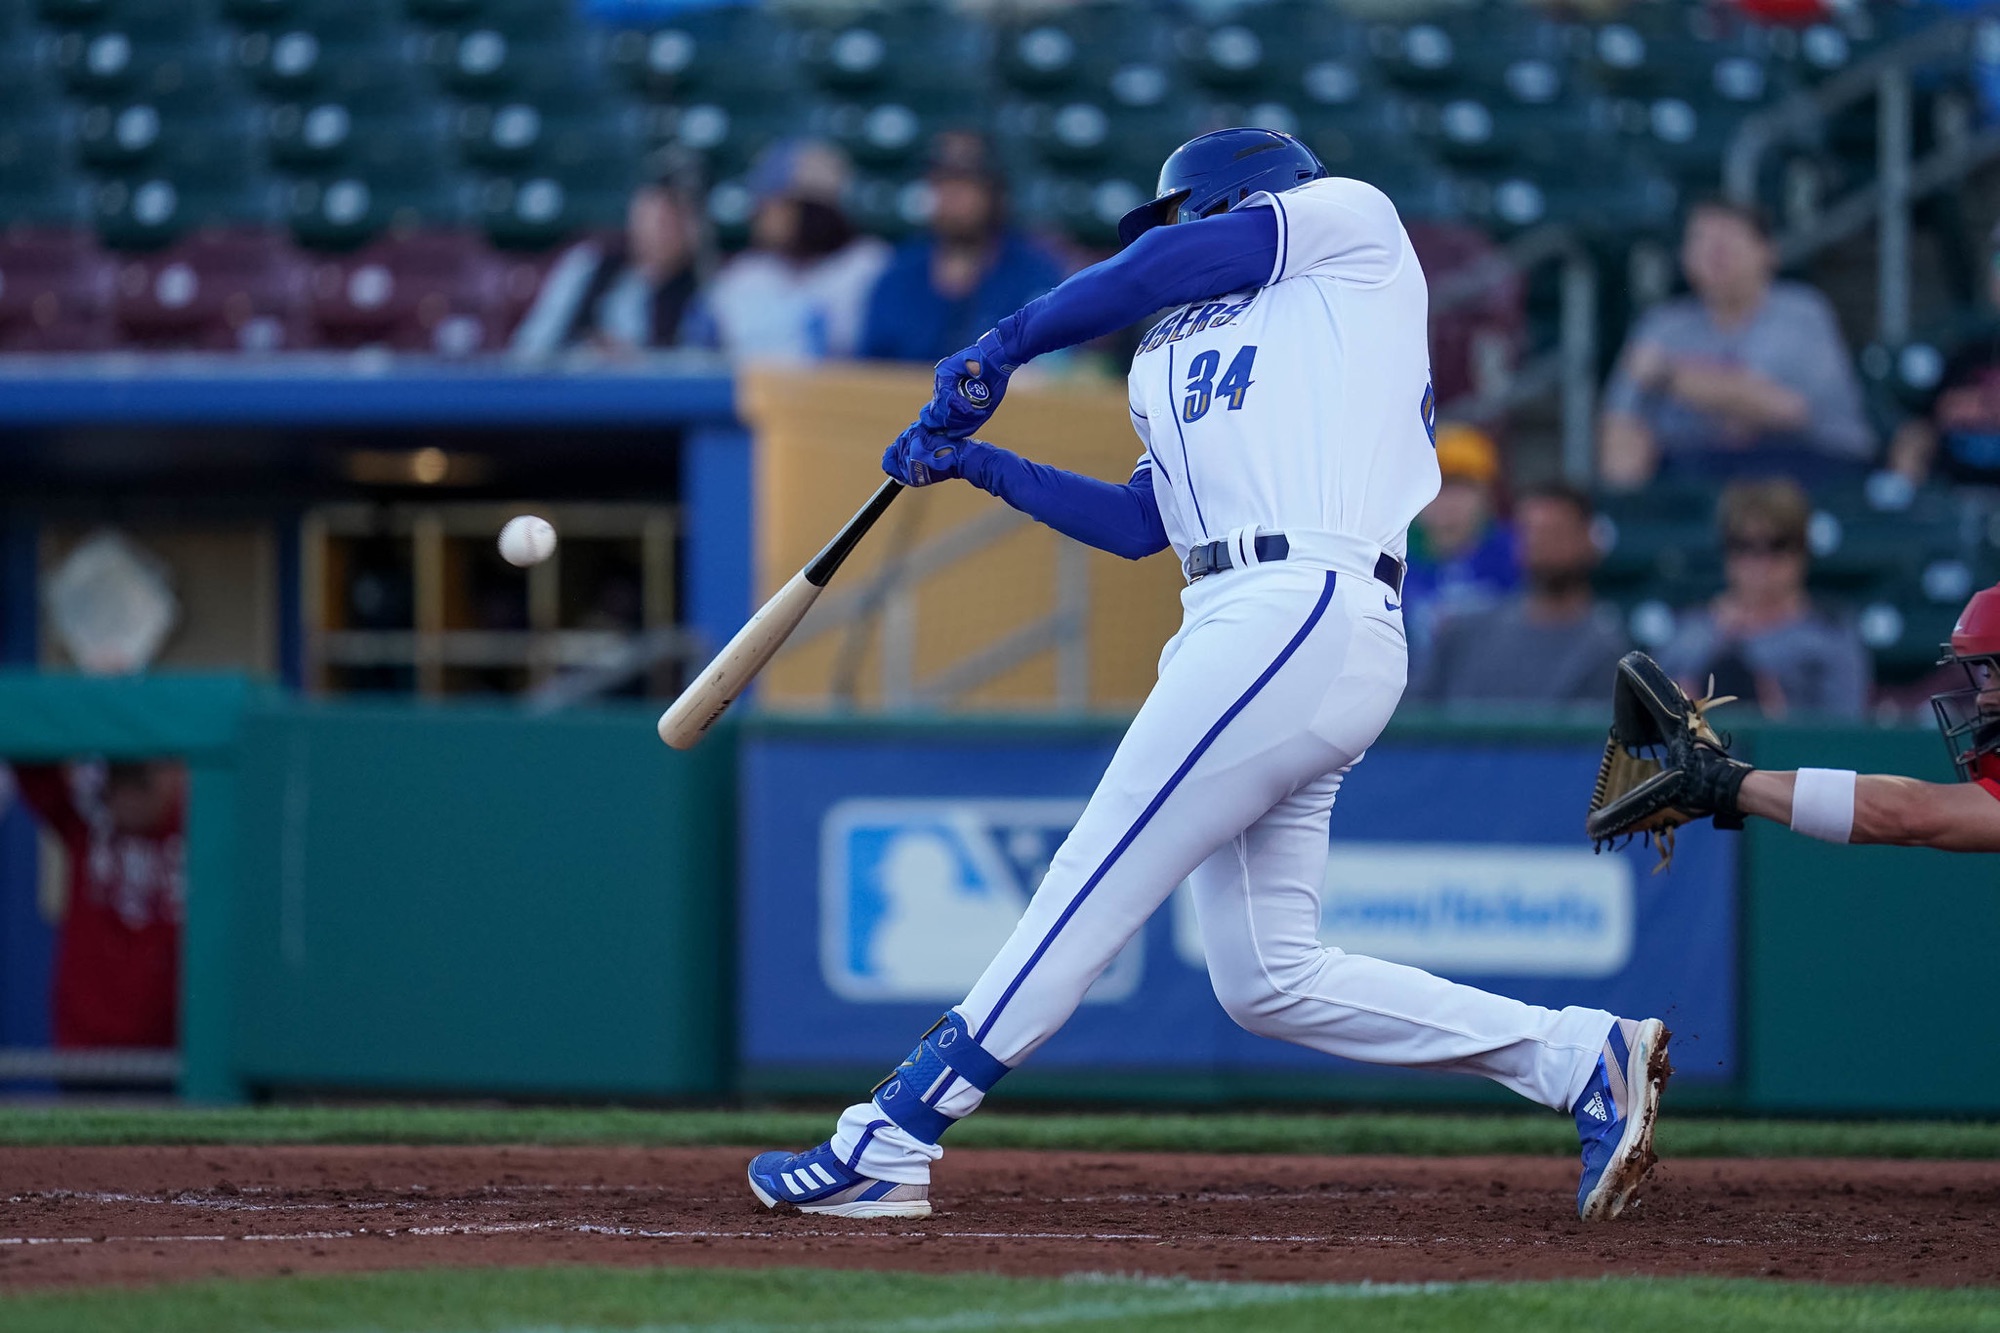 Storm Chasers’ May hitter and pitcher of the month